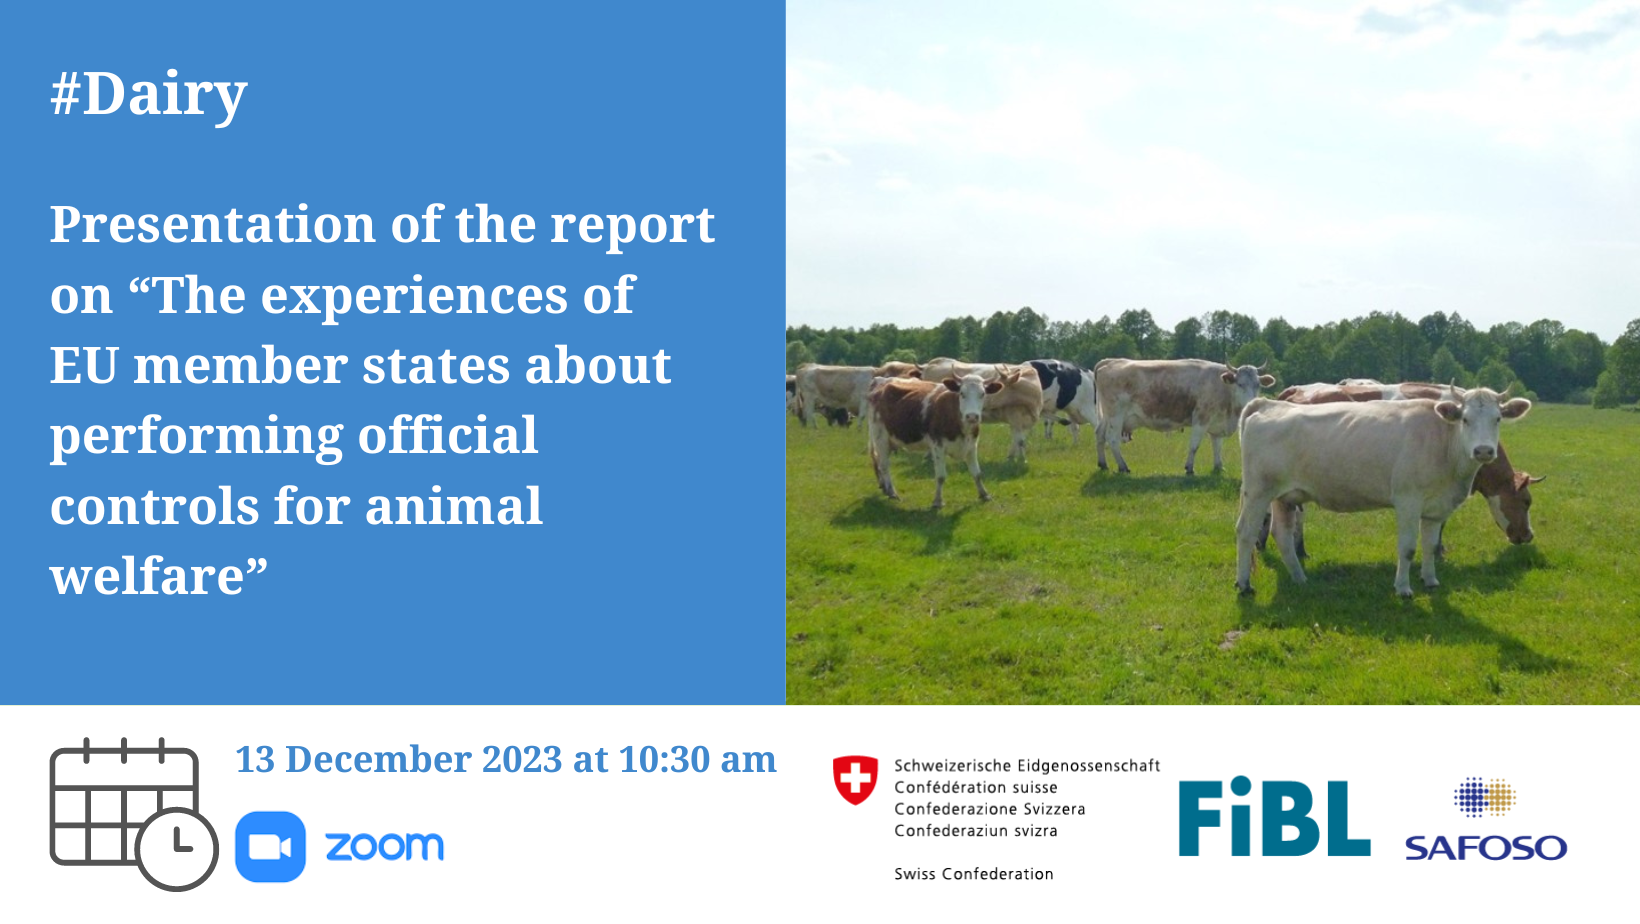 Presentation of the report on “The experiences of EU member states about performing official controls for animal welfare”